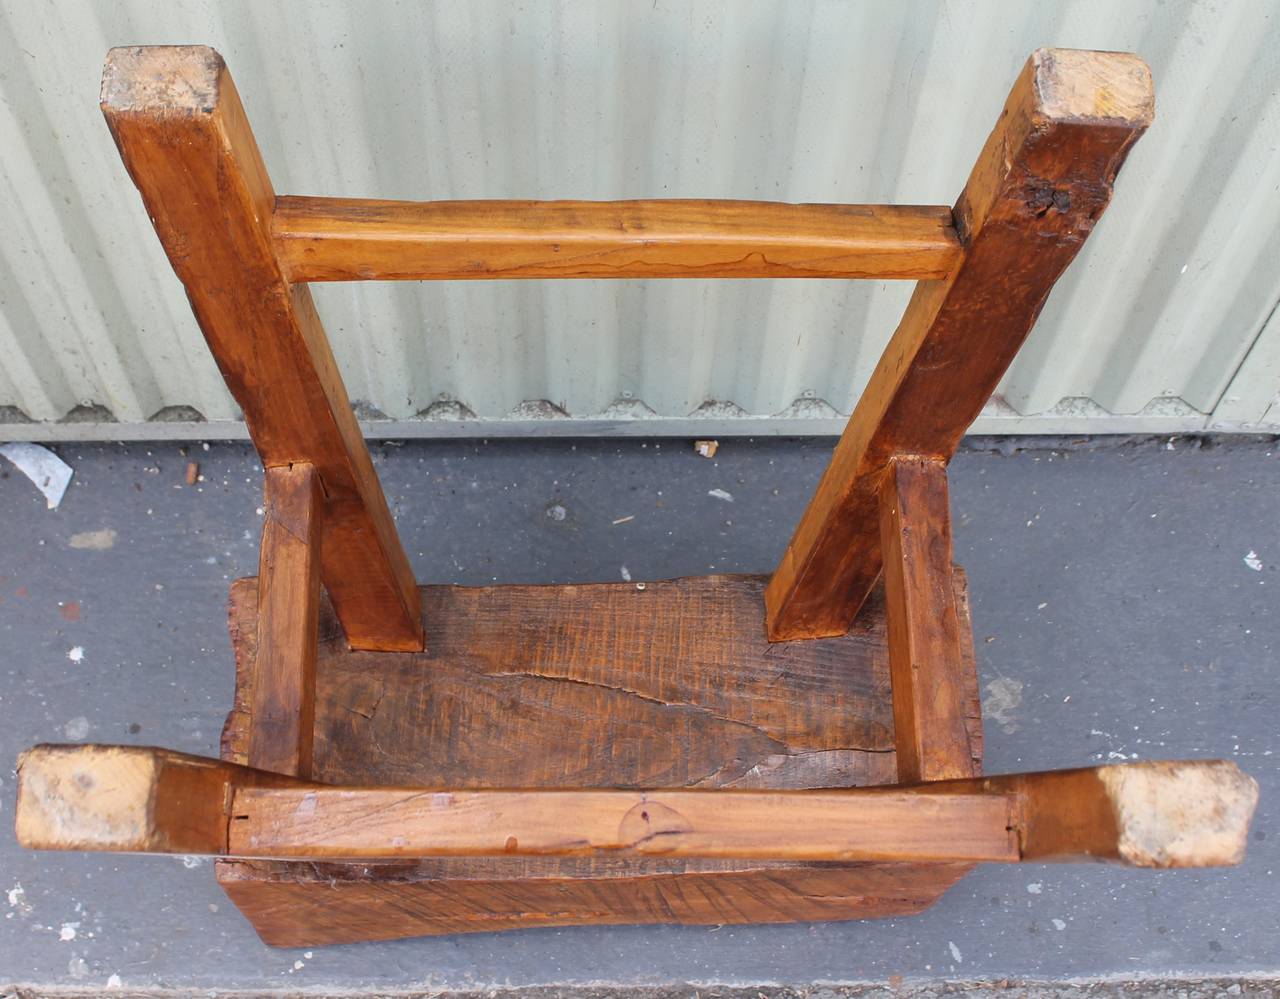 Hand-Carved 19th Century Butcher Block Plank Seat Bench